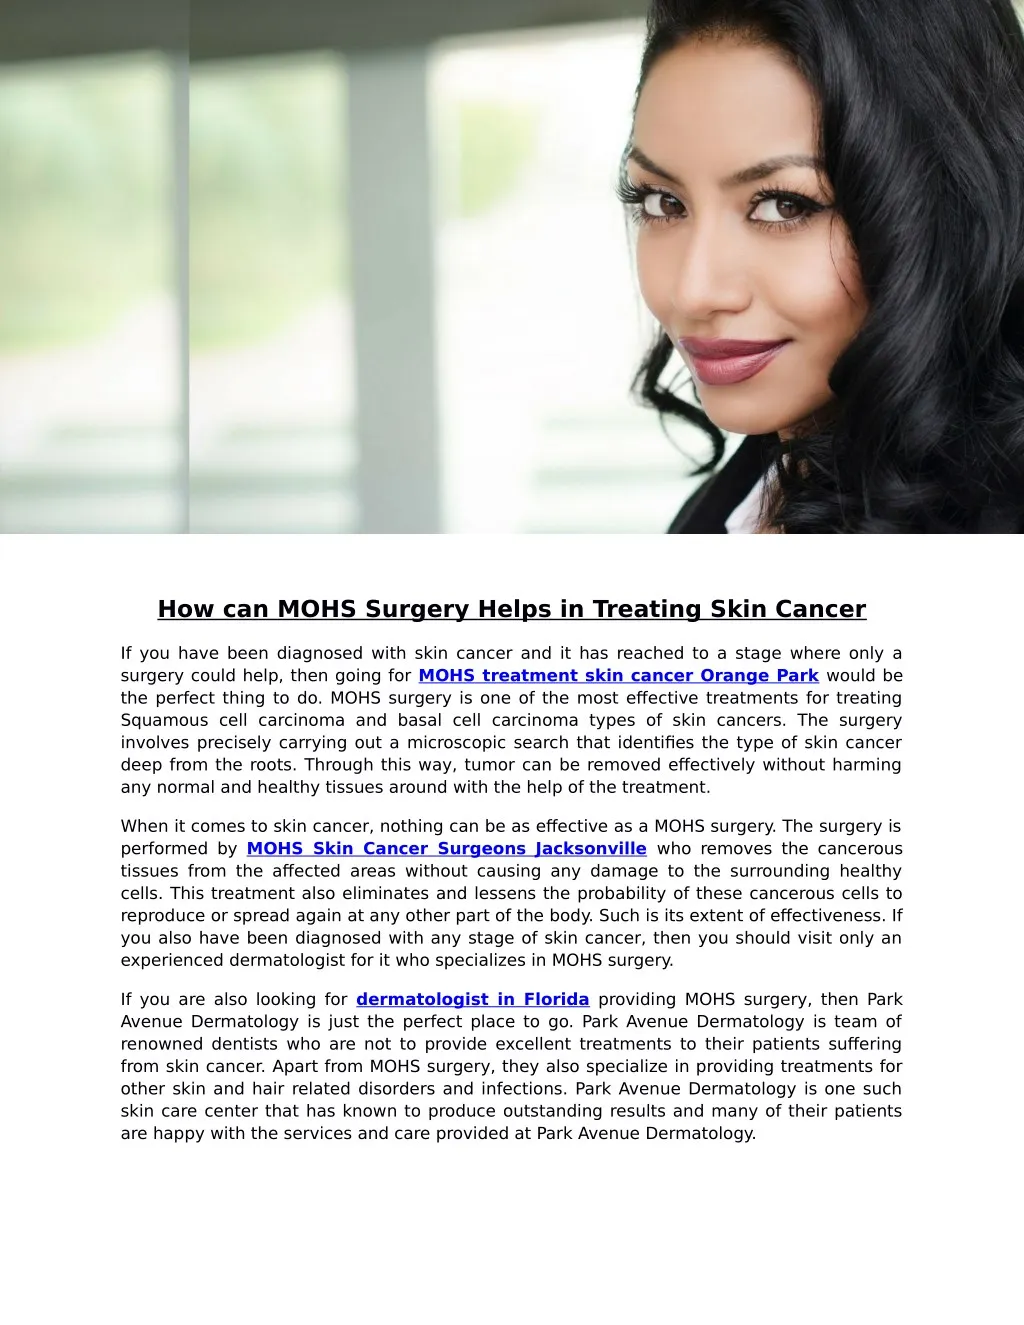 how can mohs surgery helps in treating skin cancer